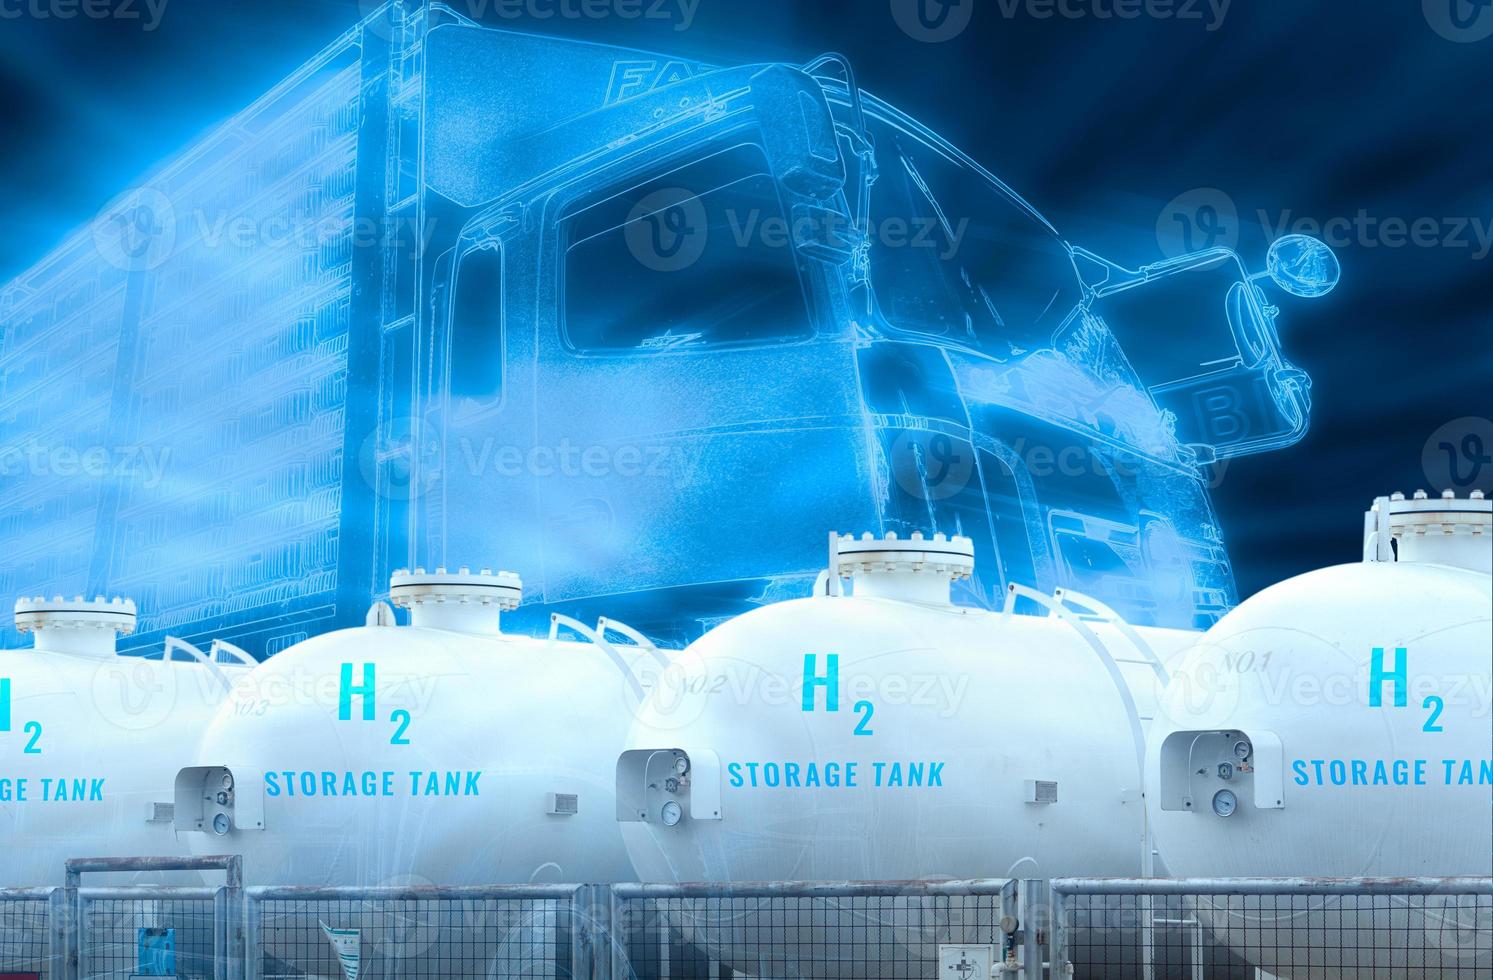 Electric truck with H2 fuel storage tank. Blue hydrogen concept. Electric vehicle trailer truck. Sustainable energy. Net zero emissions by 2050. Commercial logistic truck transport with green power. photo